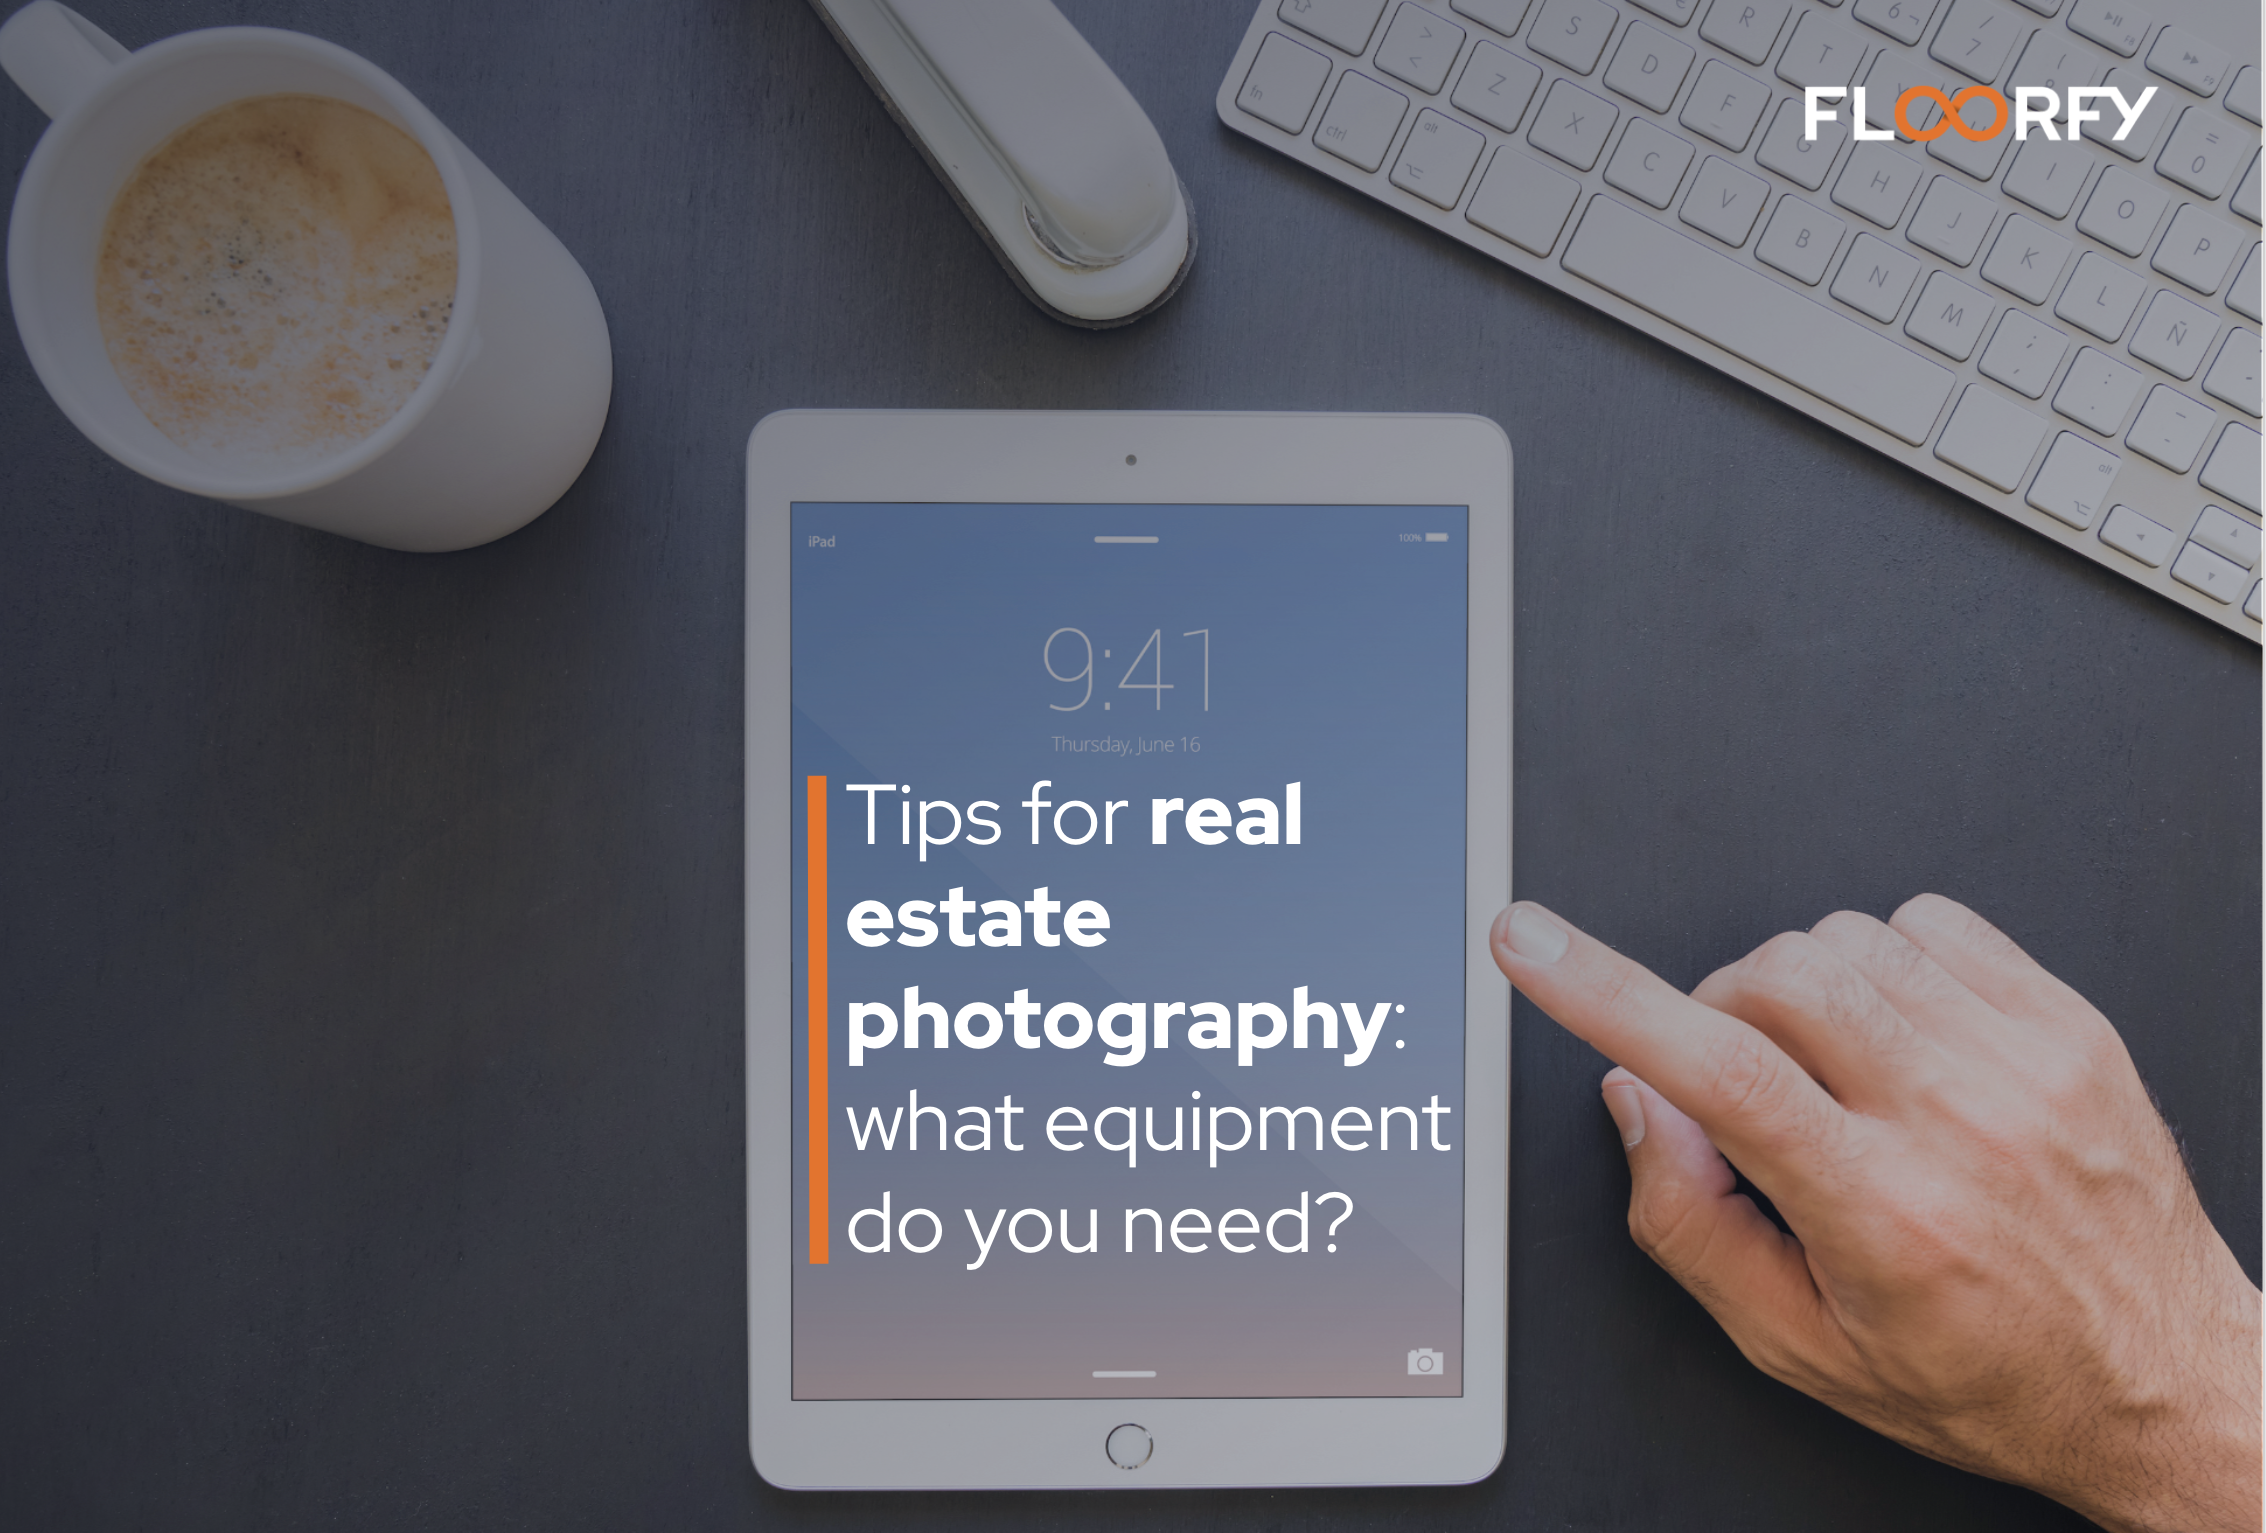 Tips for real estate photography equipment